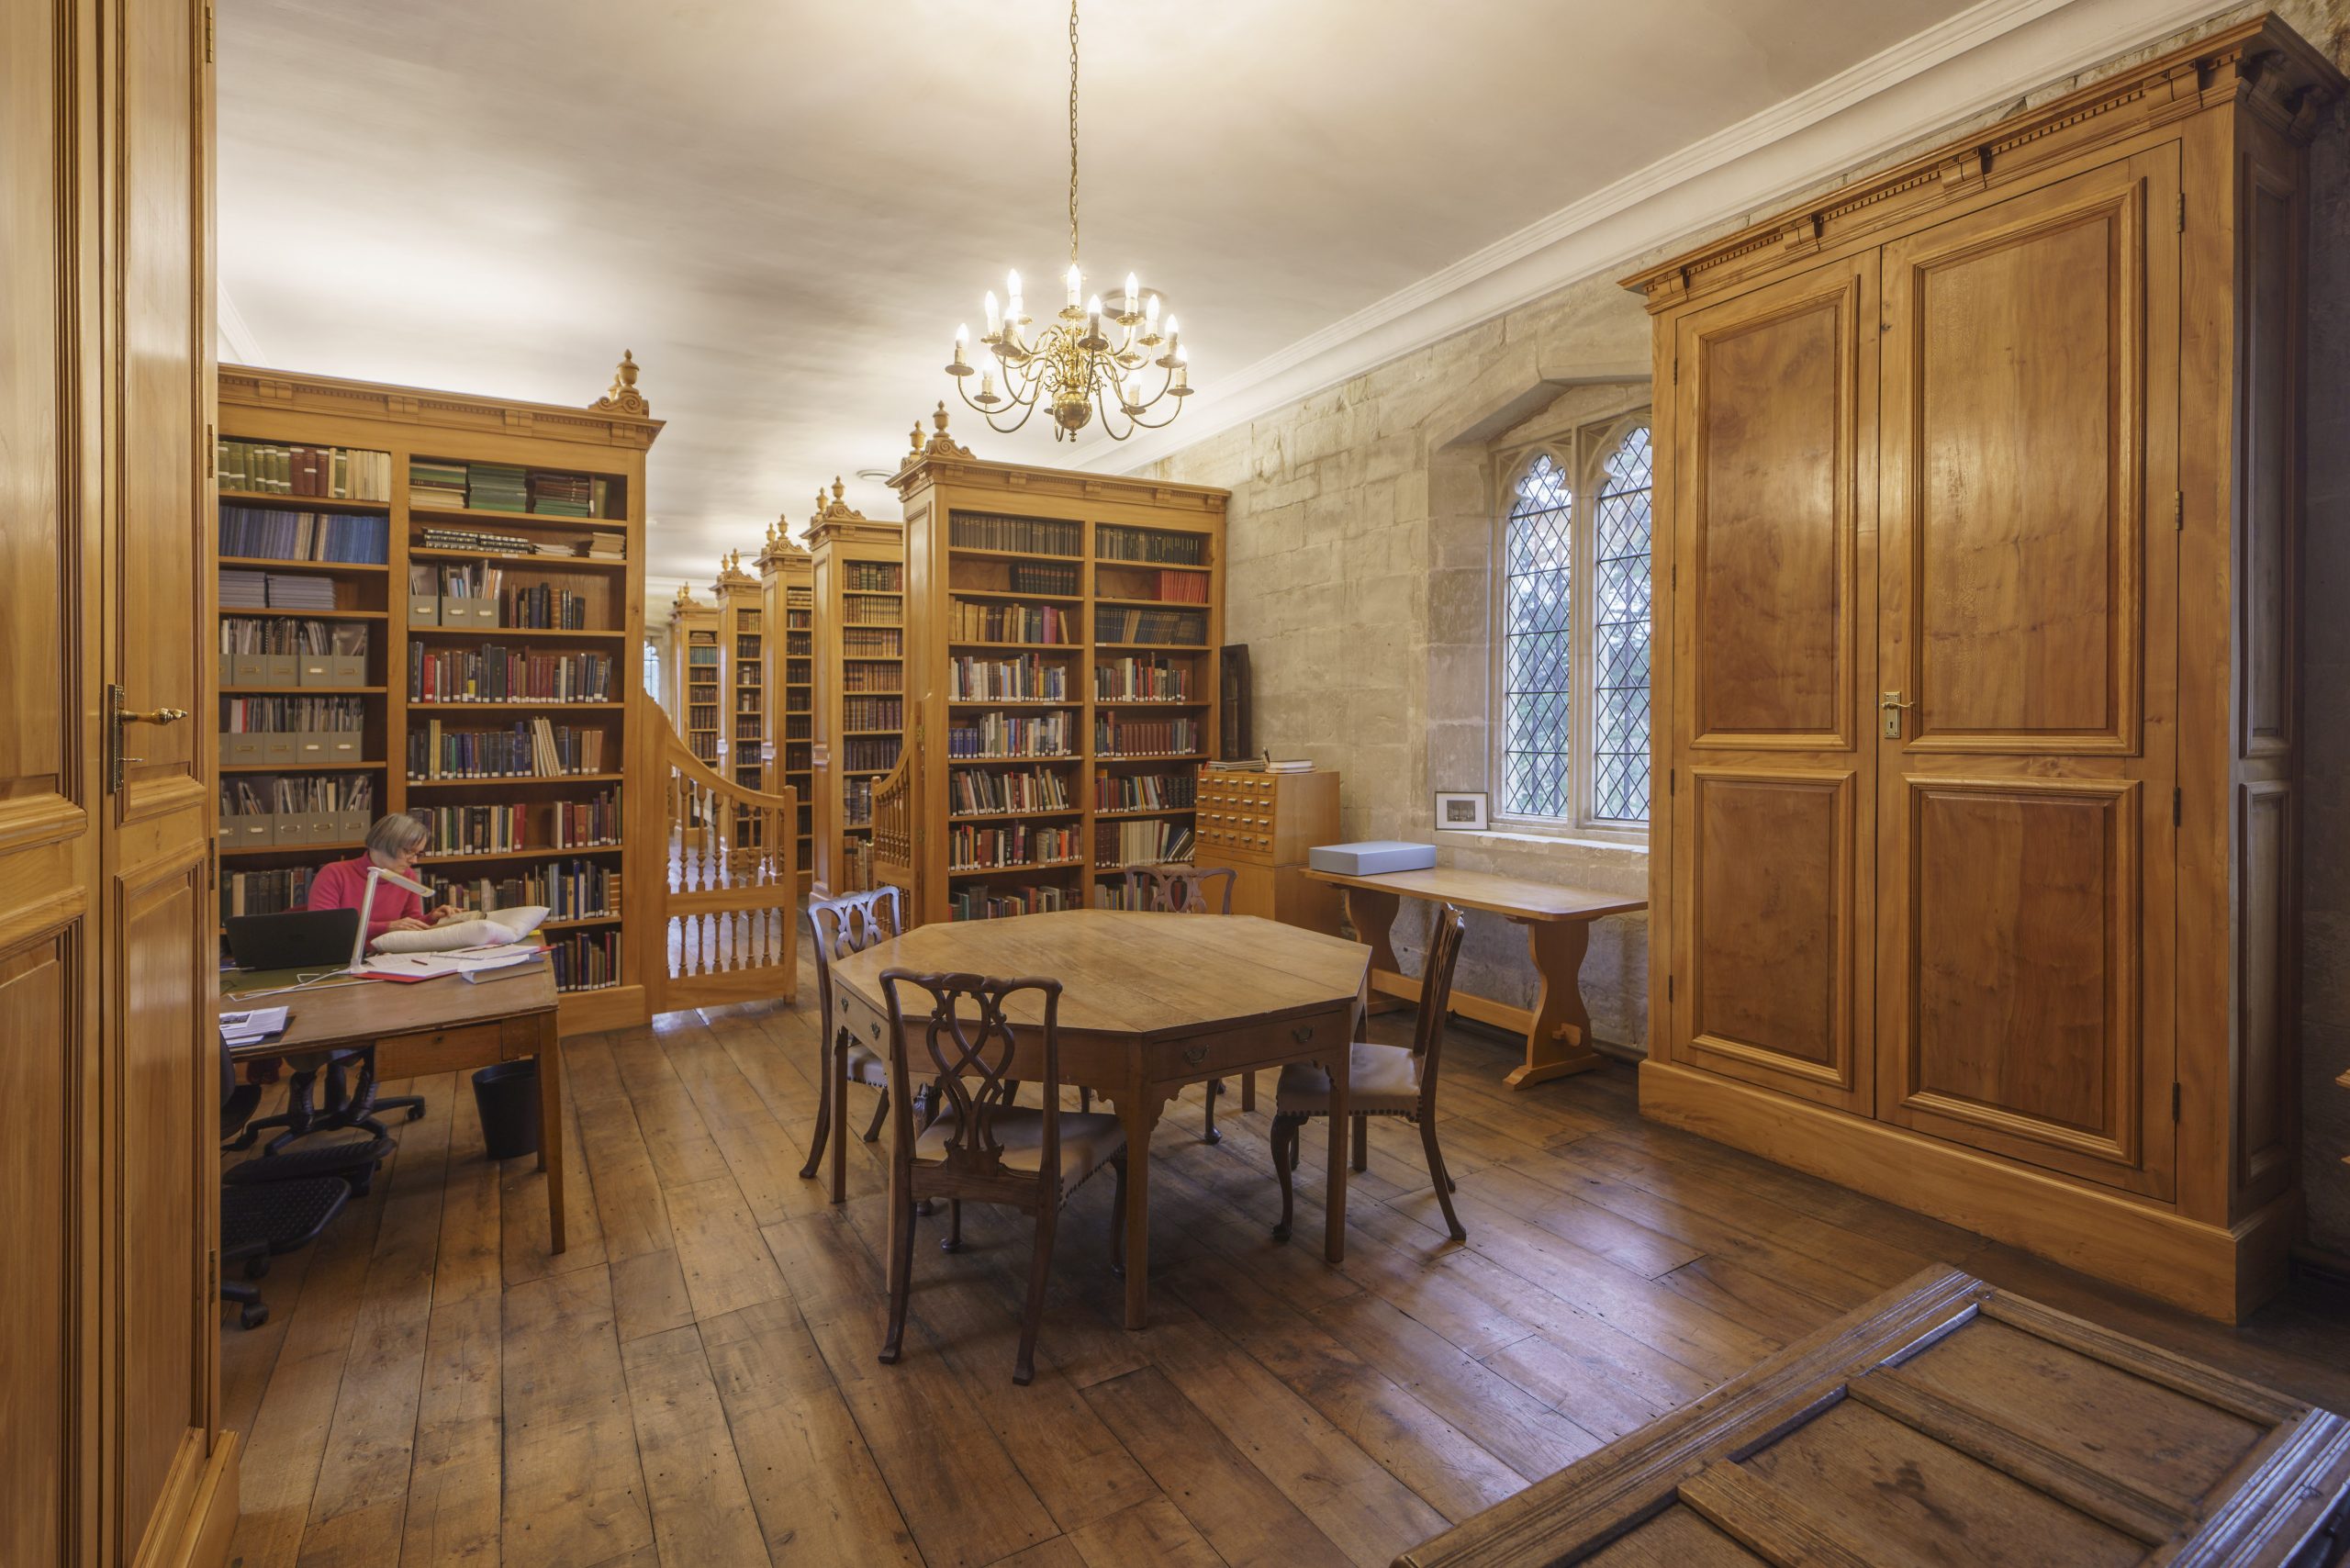 Cathedral Library celebrates end of a major National Heritage Lottery Fund Project with Library Open Afternoons and events